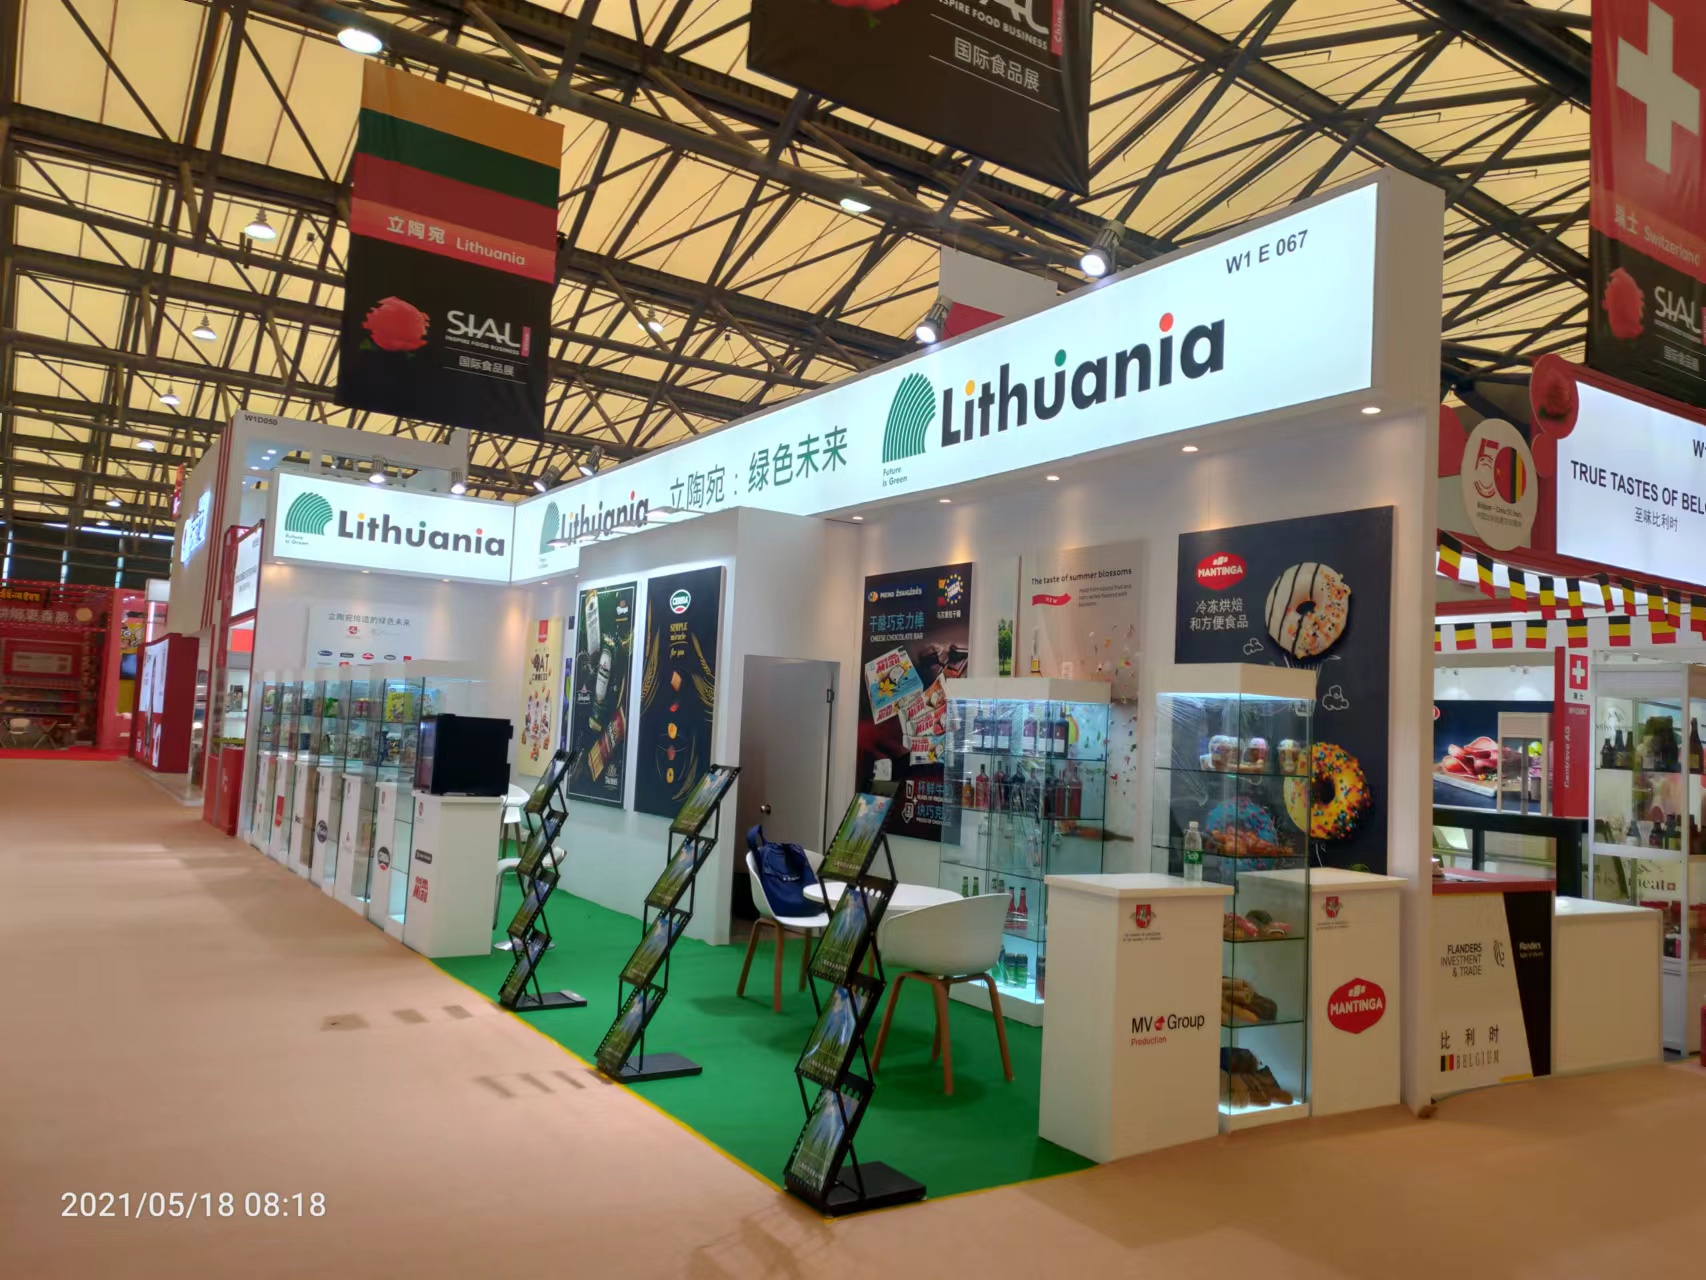 Lithuania pavilion @SialChina exhibition stand